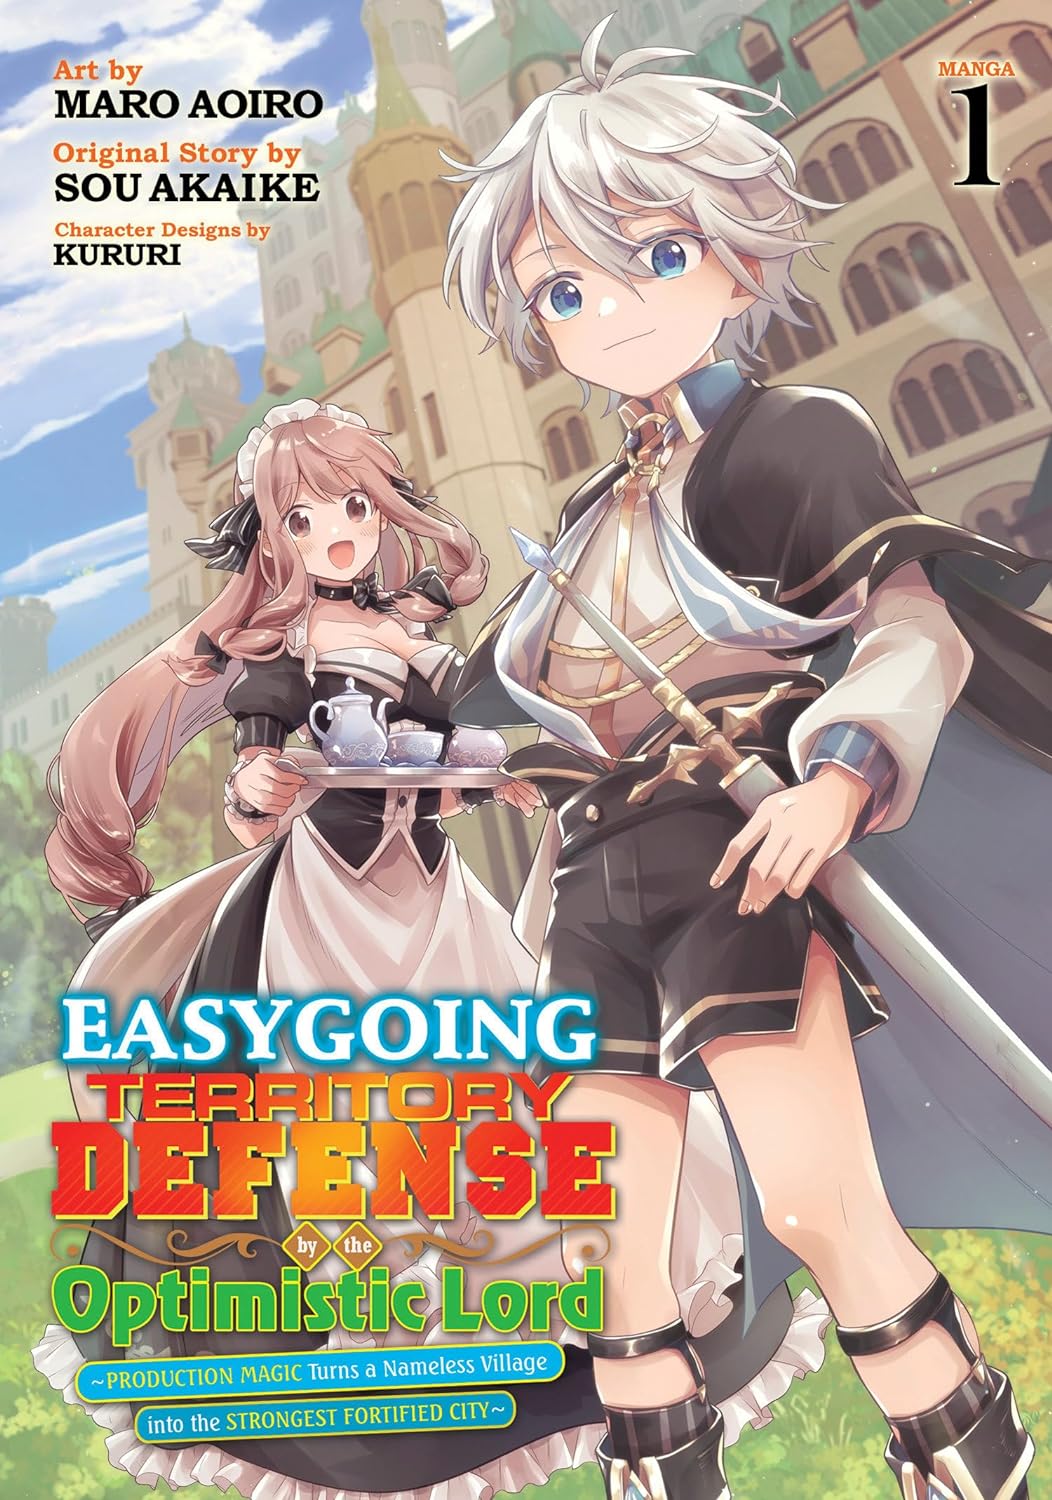 Easygoing Territory Defense by the Optimistic Lord: Production Magic Turns a Nameless Village Into the Strongest Fortified City (Manga) Vol. 01